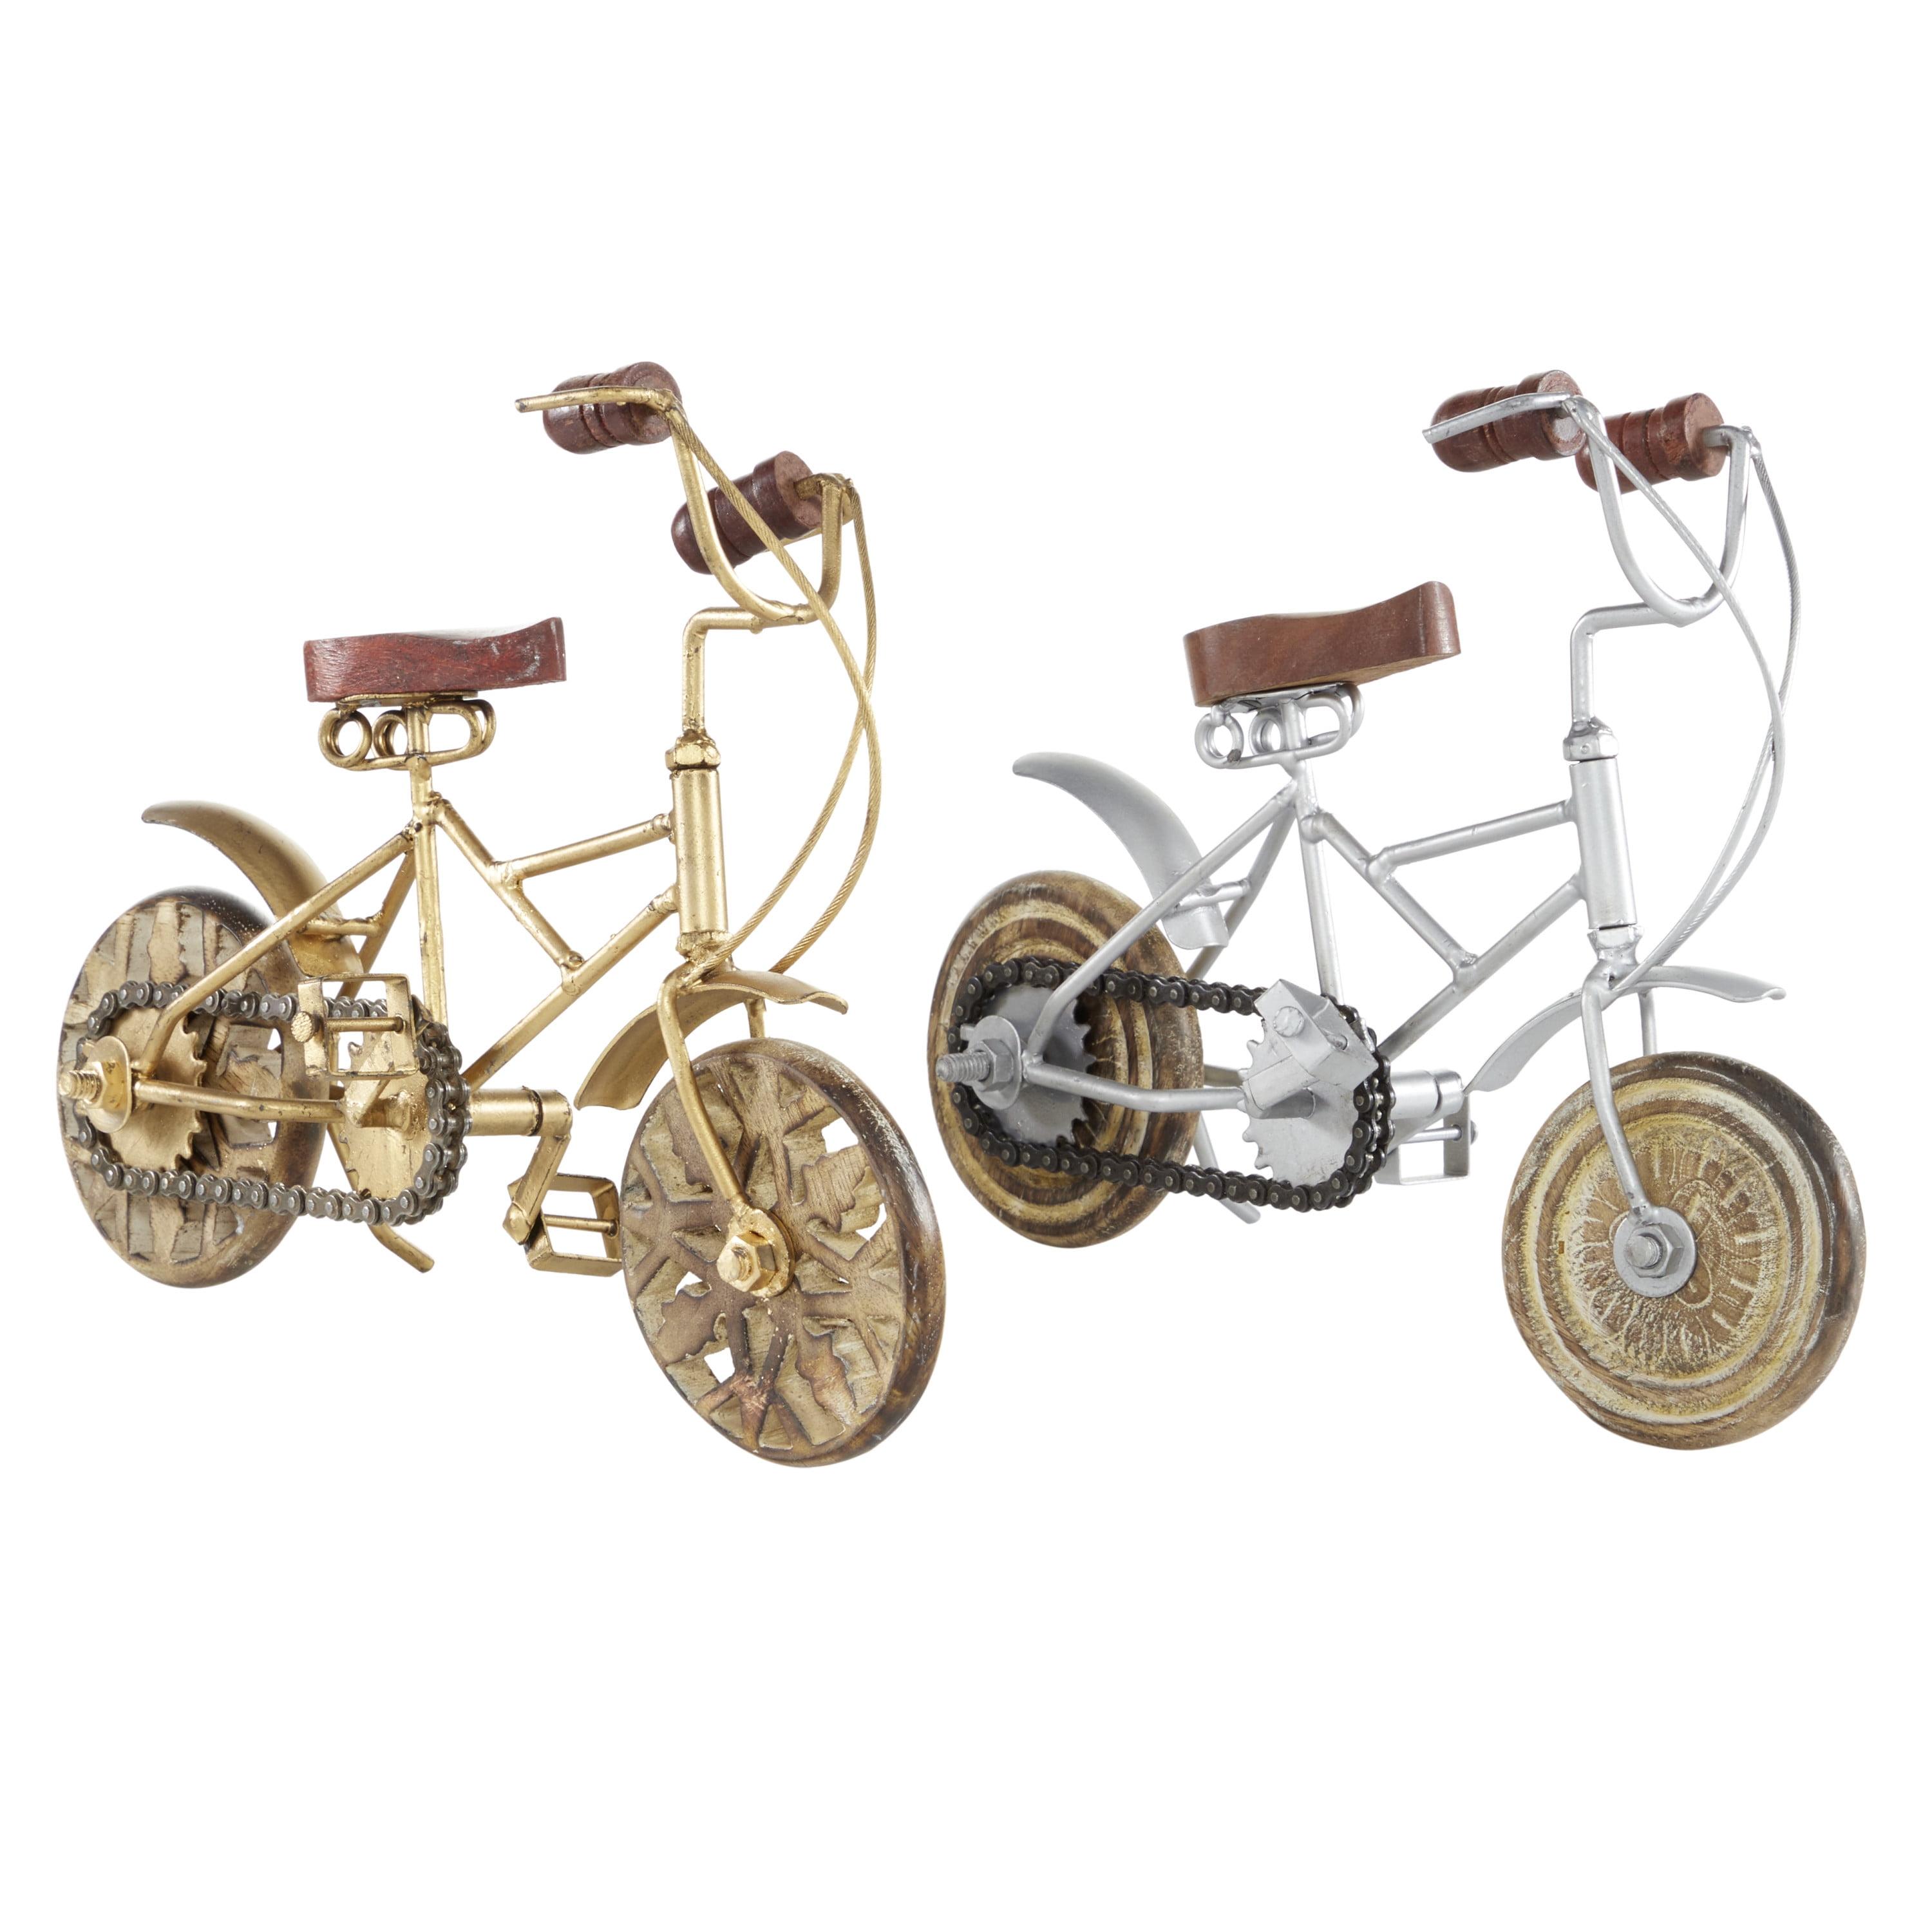 Vintage-Inspired Metallic Bicycle Statues with Wooden Accents, Set of 2